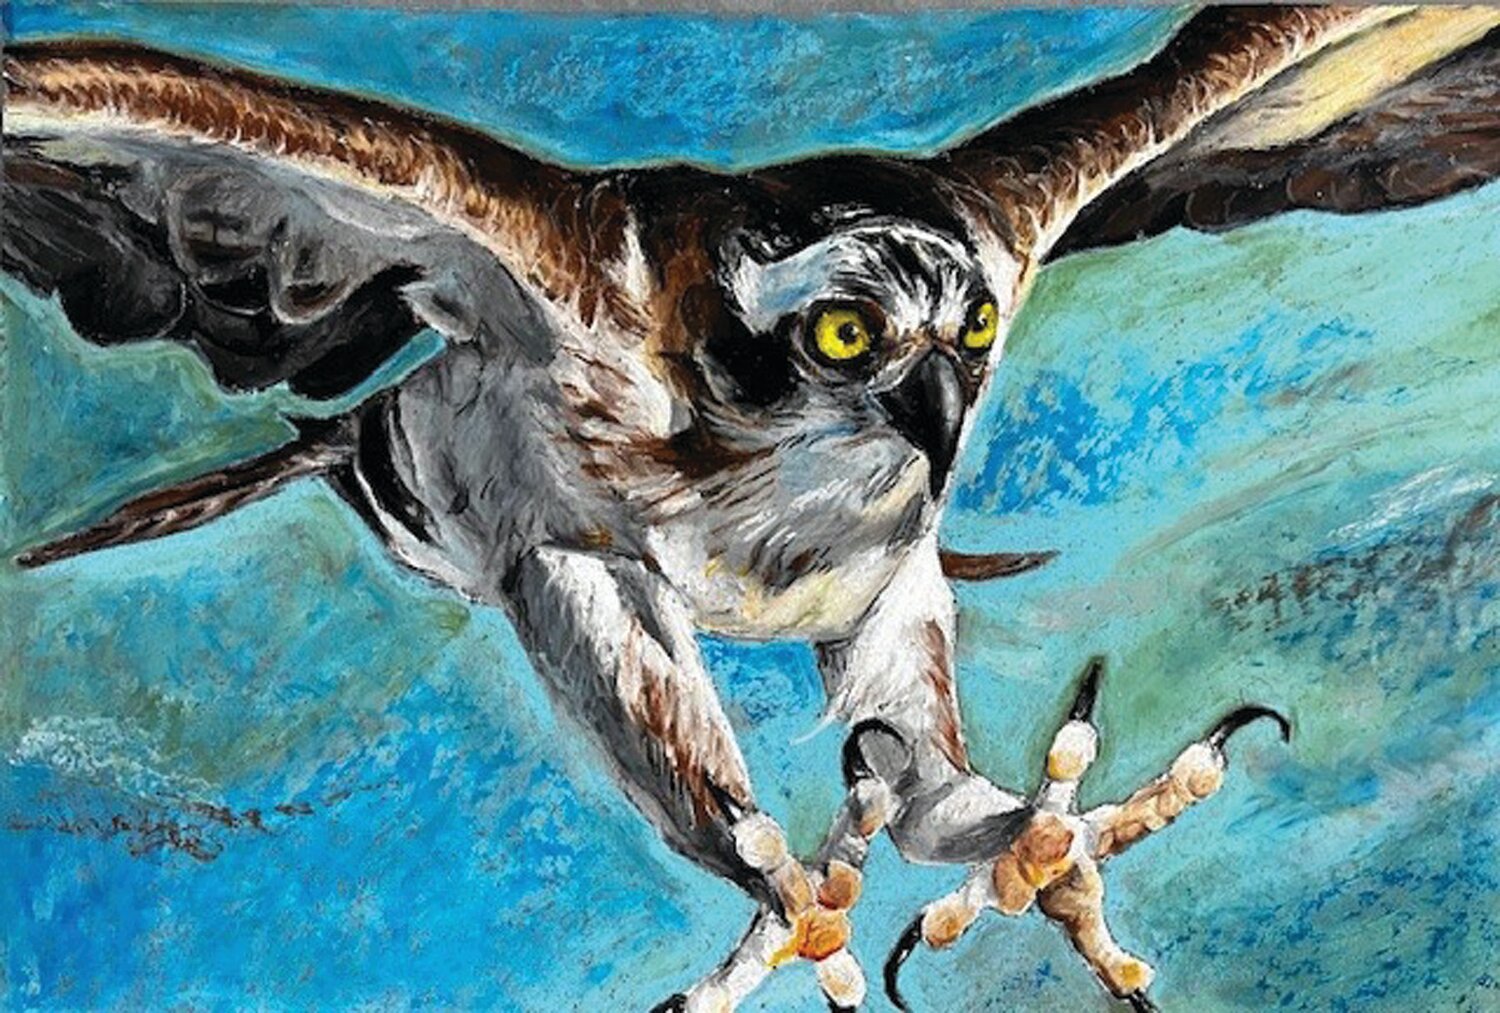 “Osprey” is a work in oil pastels by Neshaminy student Olivia Phelan.